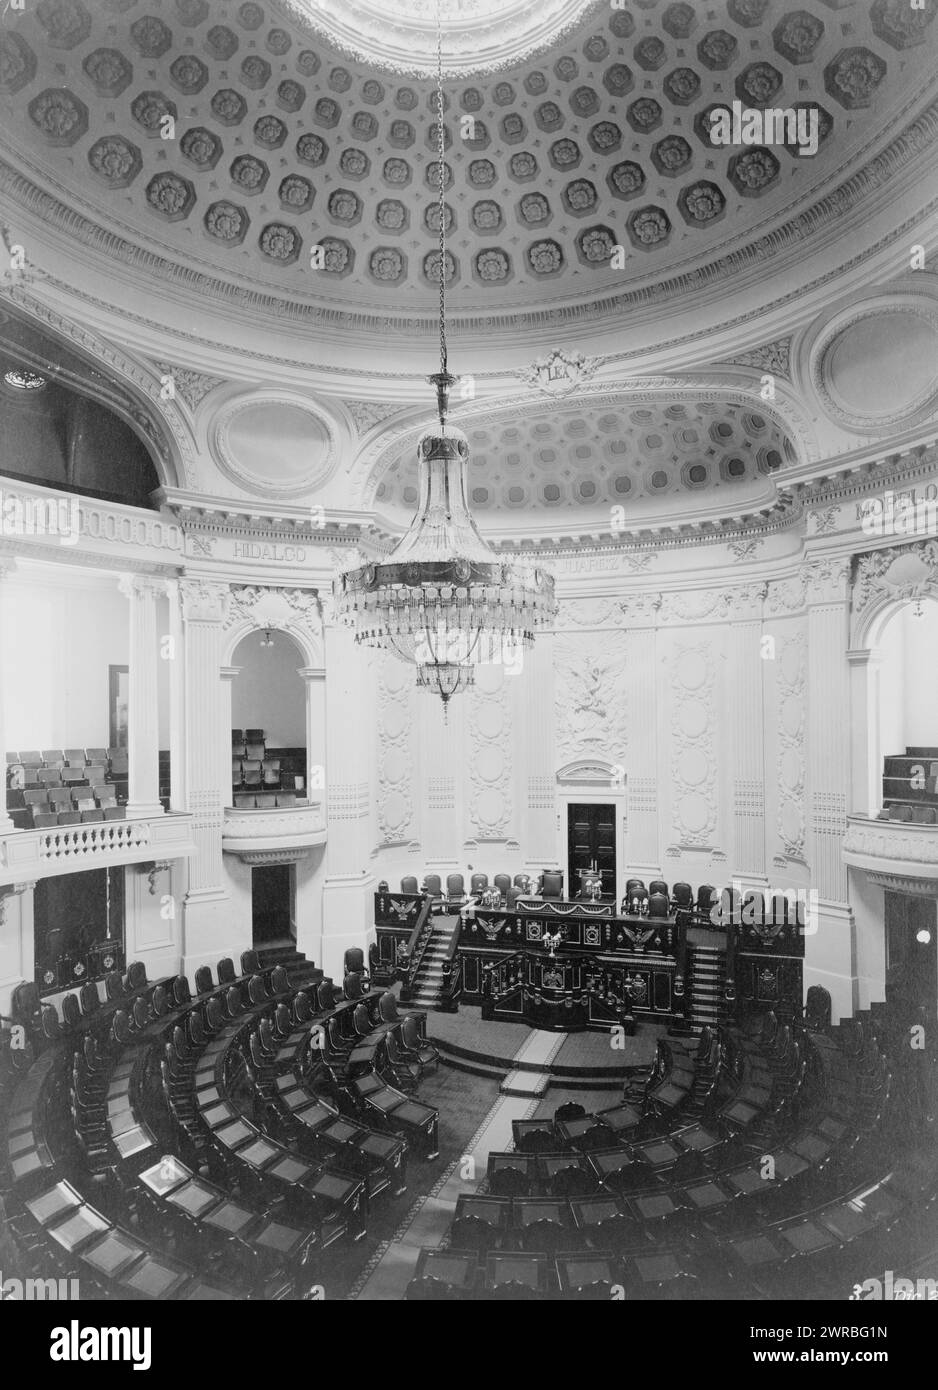 Chamber of Deputies, Lower House of the Mexican Congress, 1910, Government facilities, Mexico, 1910, Photographic prints, 1910., Photographic prints, 1910, 1 photographic print Stock Photo